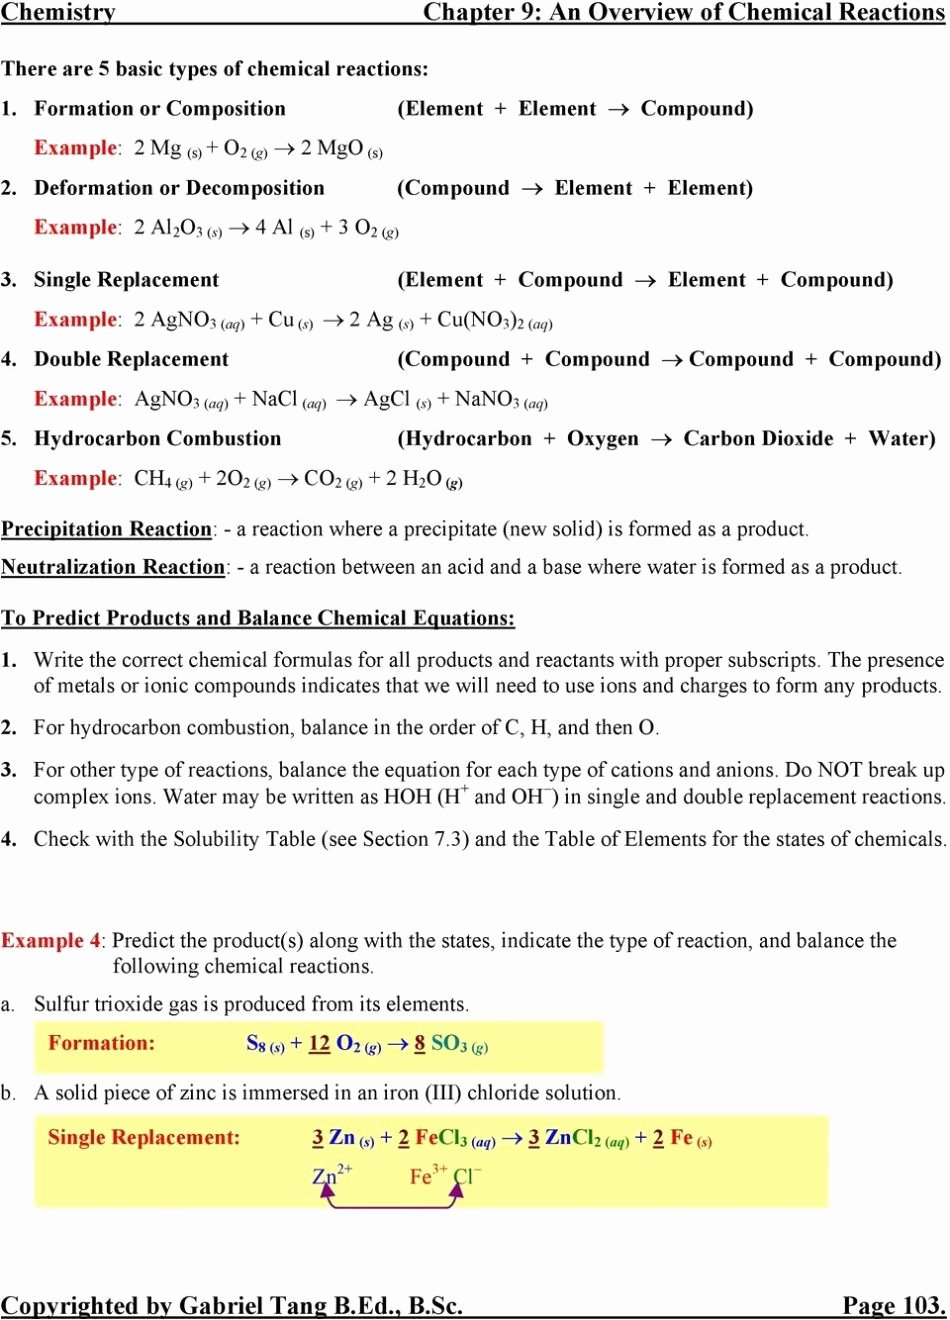 Elements Compounds Mixtures Worksheet Answers New Elements Pounds and Mixtures 1 Worksheet Answers